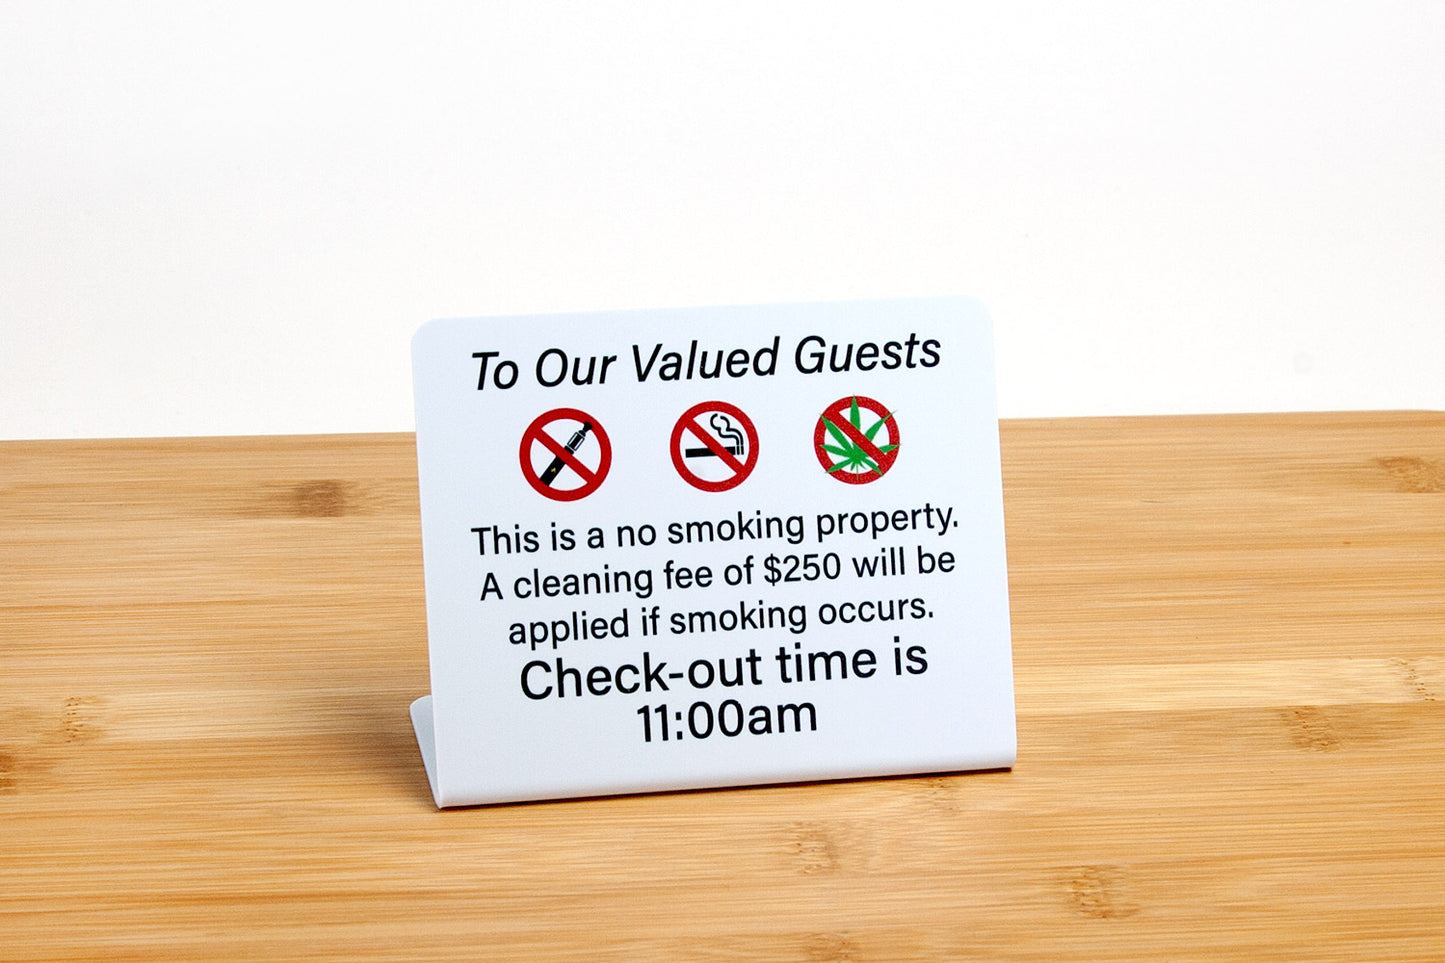 No Smoking Property & Check-Out Time Guest Room Signs